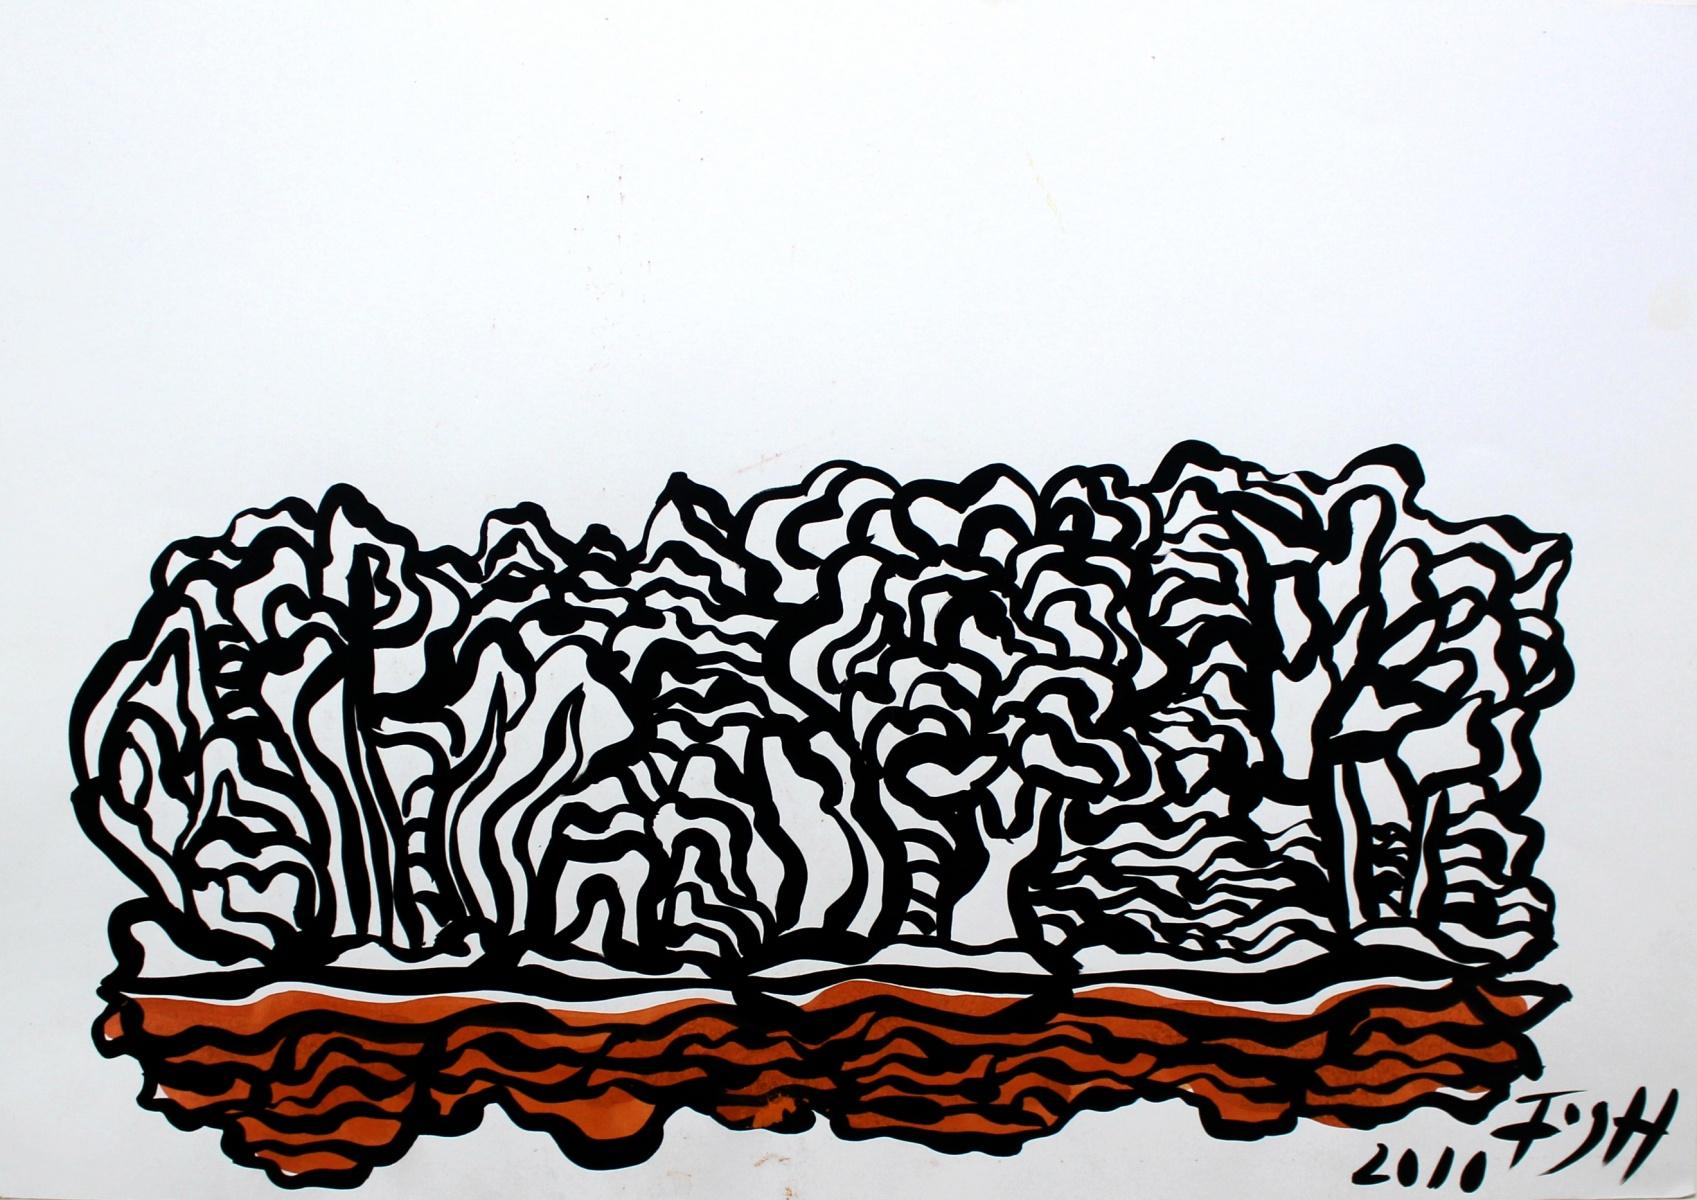 Landscape - XXI Century, Black, White And Orange, Contemporary Abstract Drawing - Art by Andrzej Fogtt